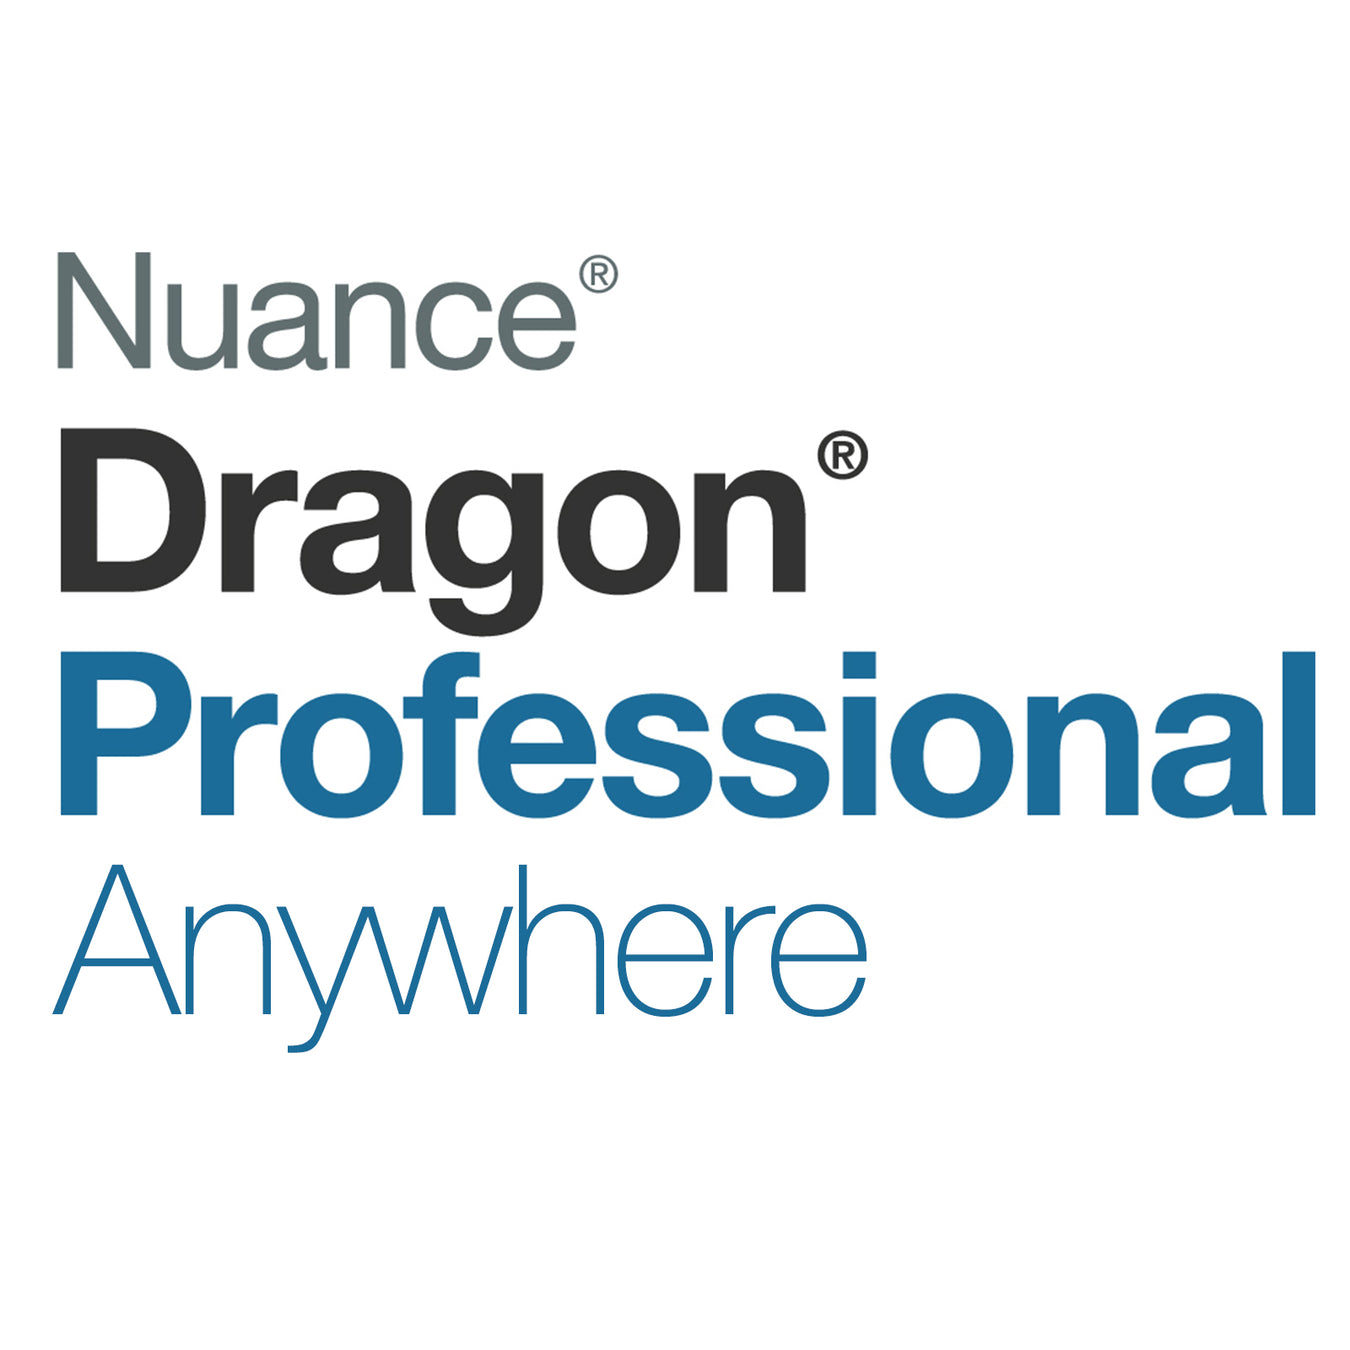 Nuance Dragon Professional Anywhere - Cloud-Based Speech Recognition Subscription